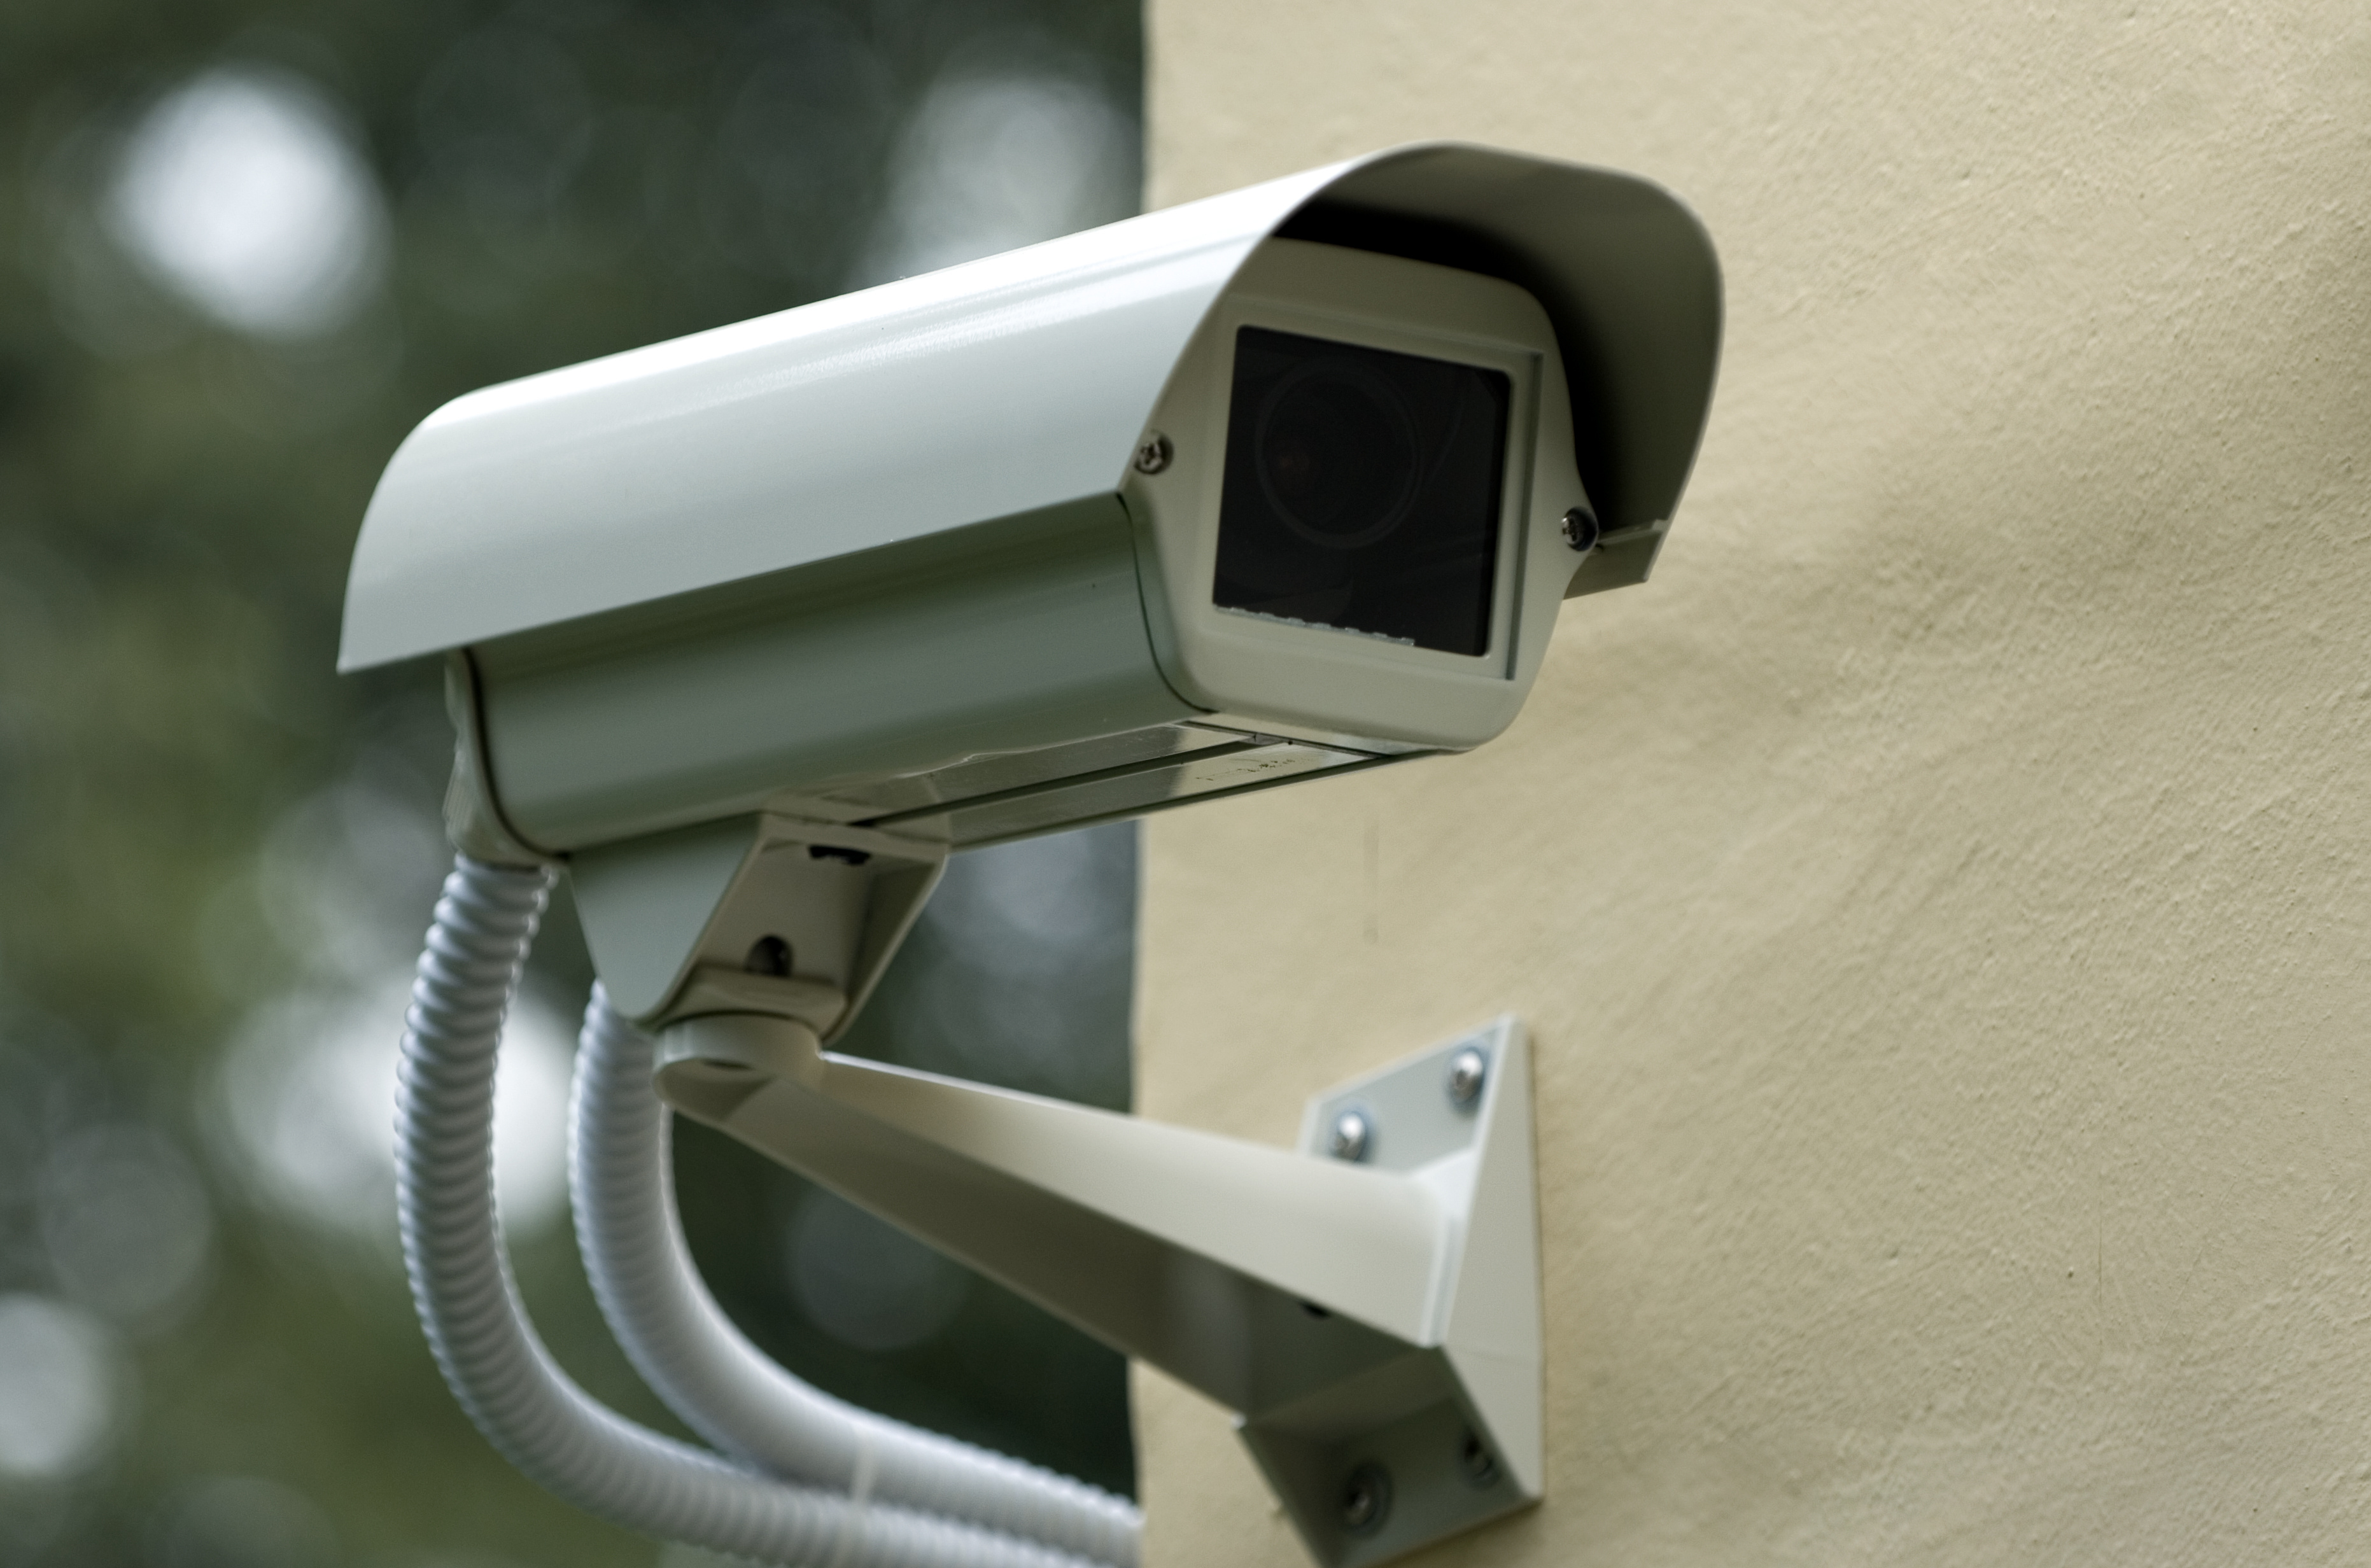 security camera mounted on a wall